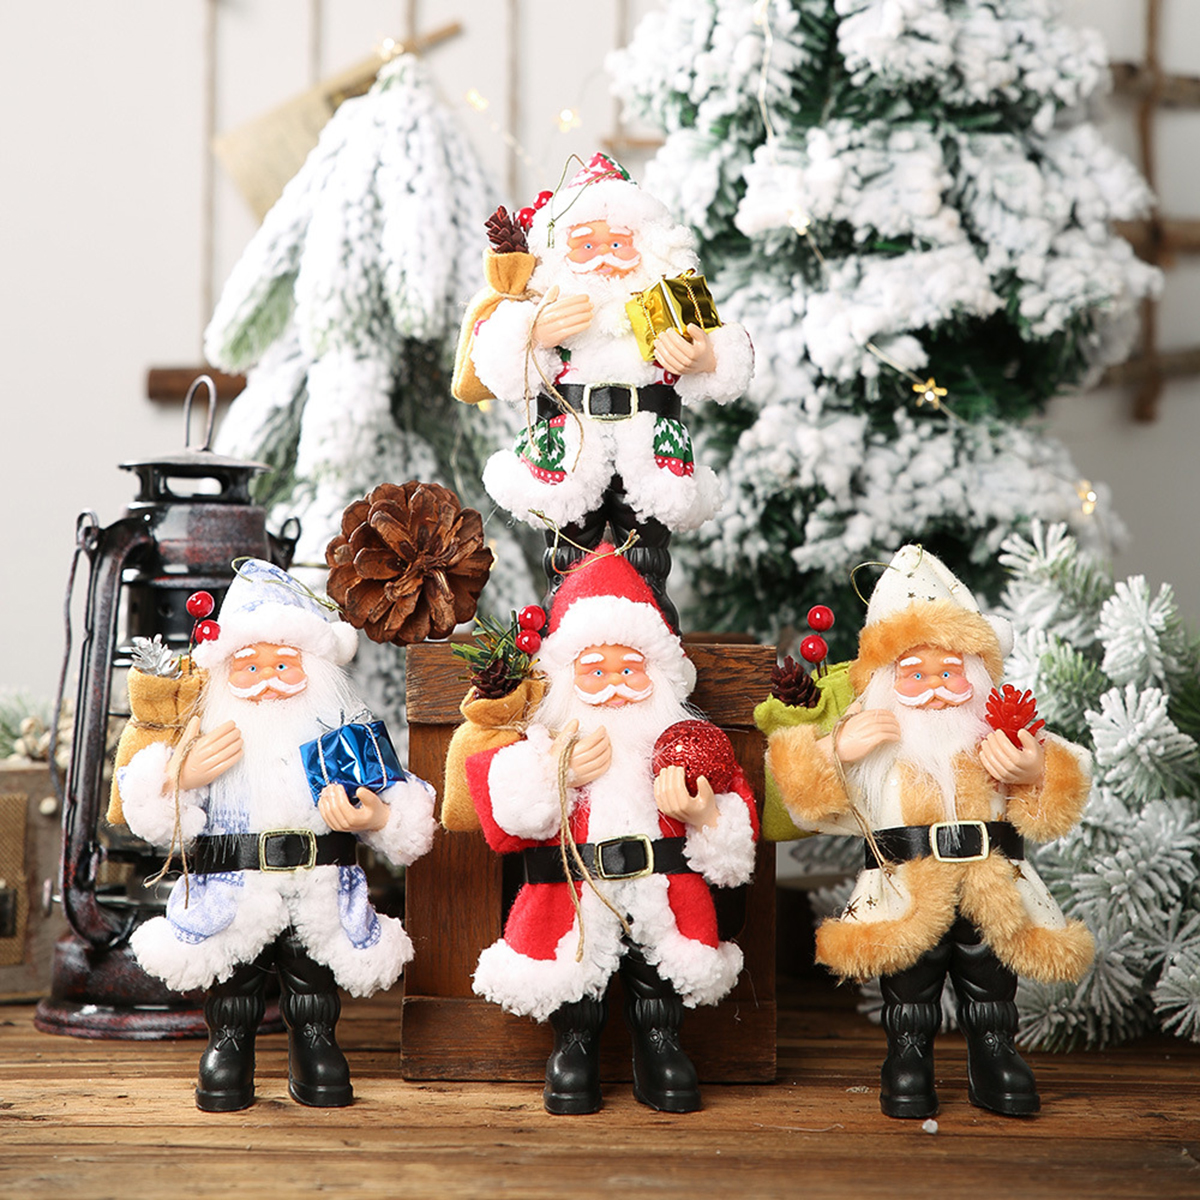 

Christmas Tree Hanging Santa Claus Crafts Resin Ornaments Home Party Decorations